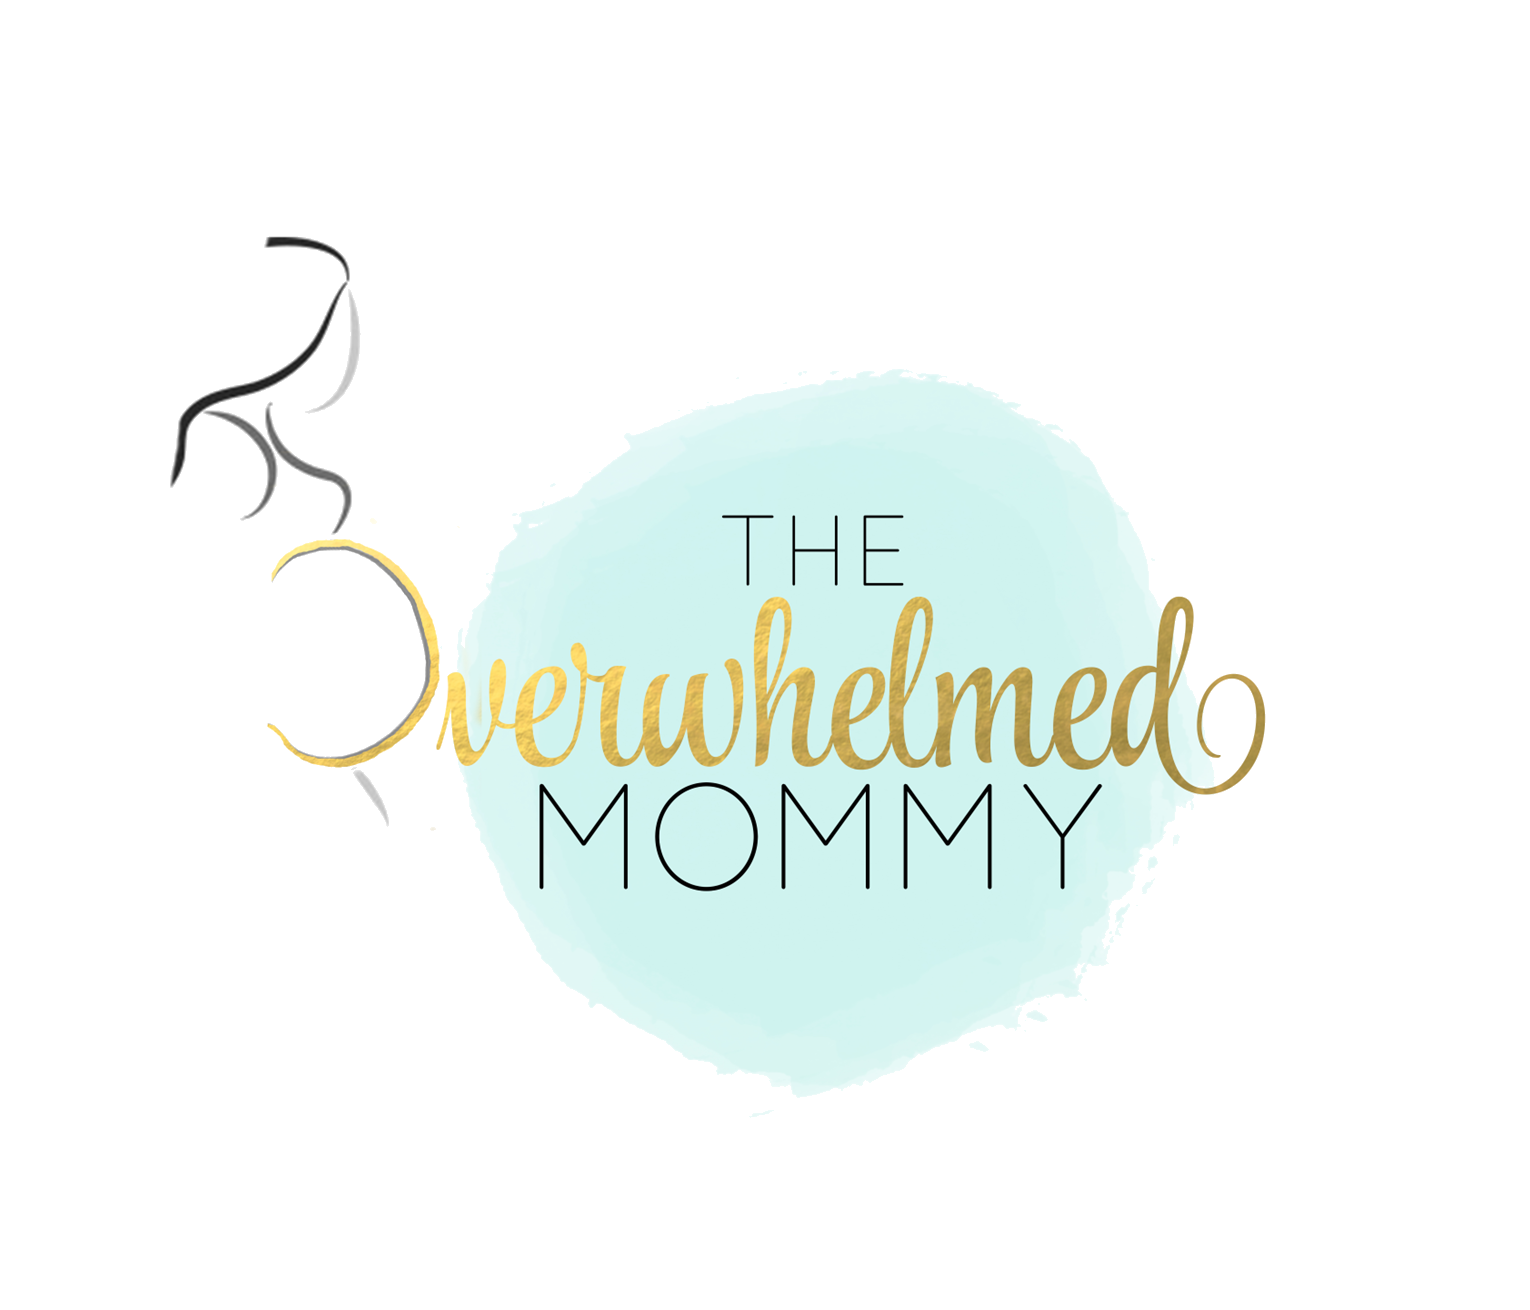 Baby Proofing Checklist — The Overwhelmed Mommy Blog